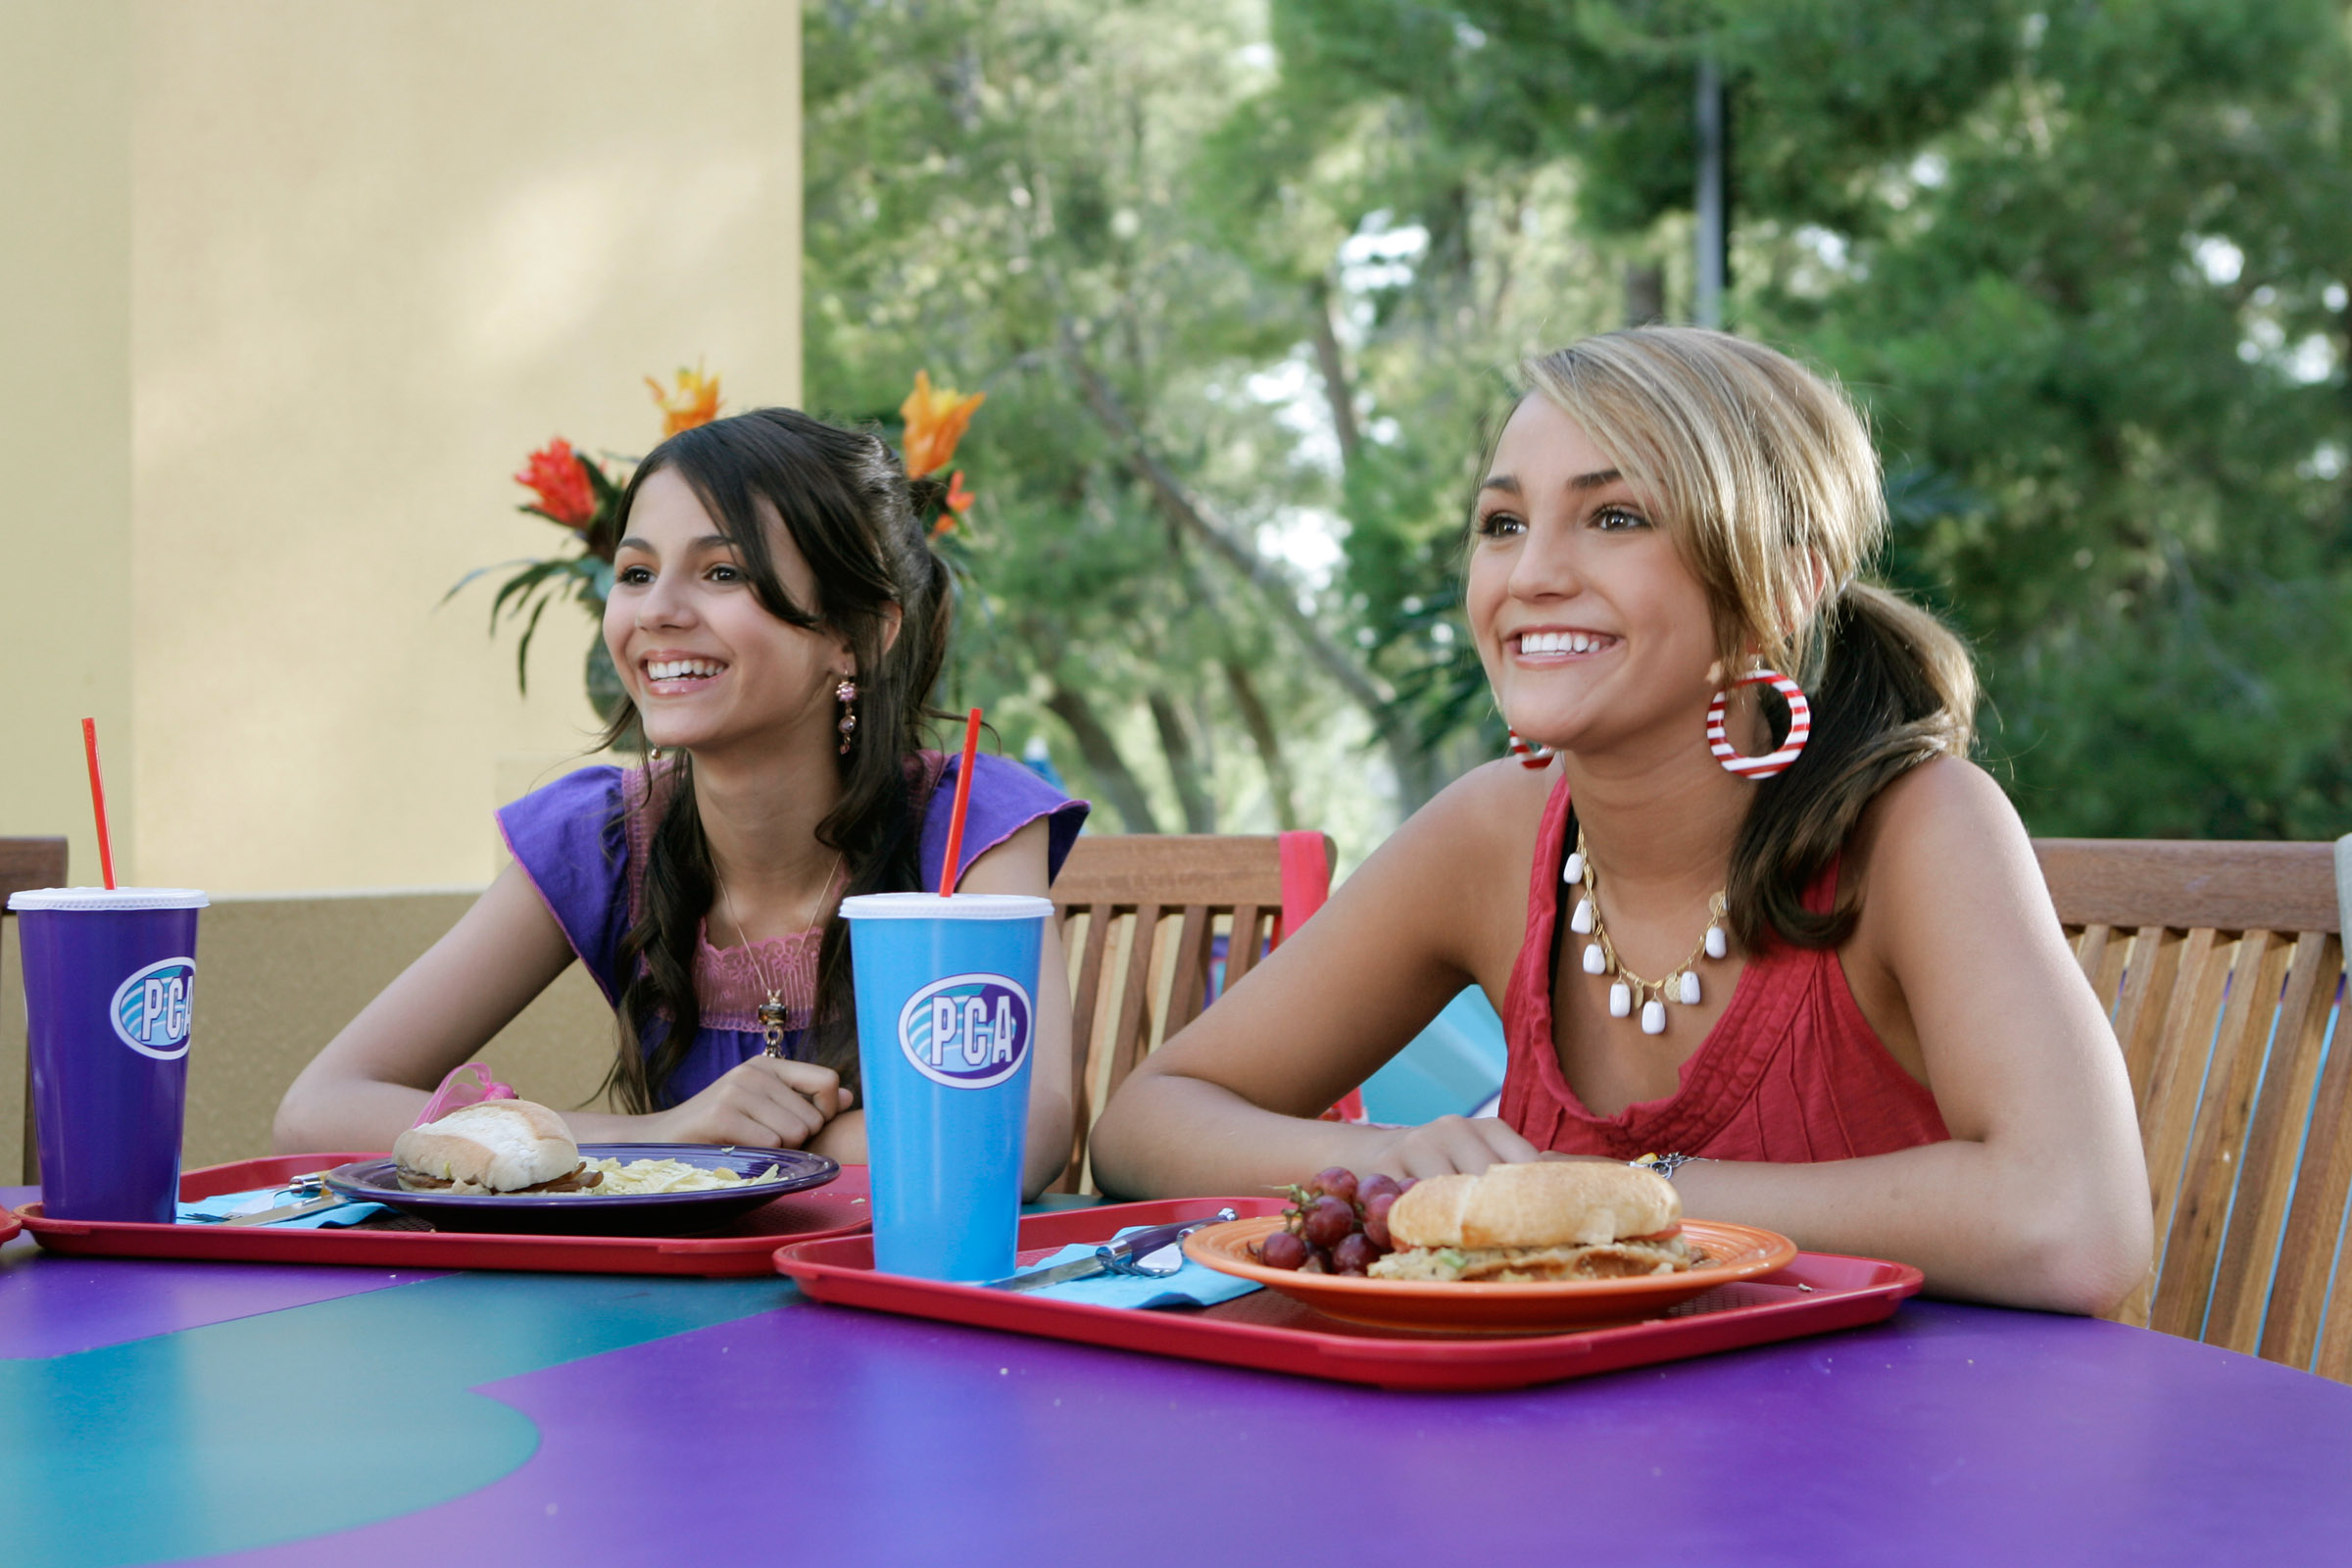 ZOEY 101, (from left): Victoria Justice, Jamie Lynn Spears, 'Chase's Girlfriend', (Season 3, ep. 302, aired Oct. 1, 2006), 2005-08. photo: Mitchell Haddad / © Nickelodeon / Courtesy: Everett Collection